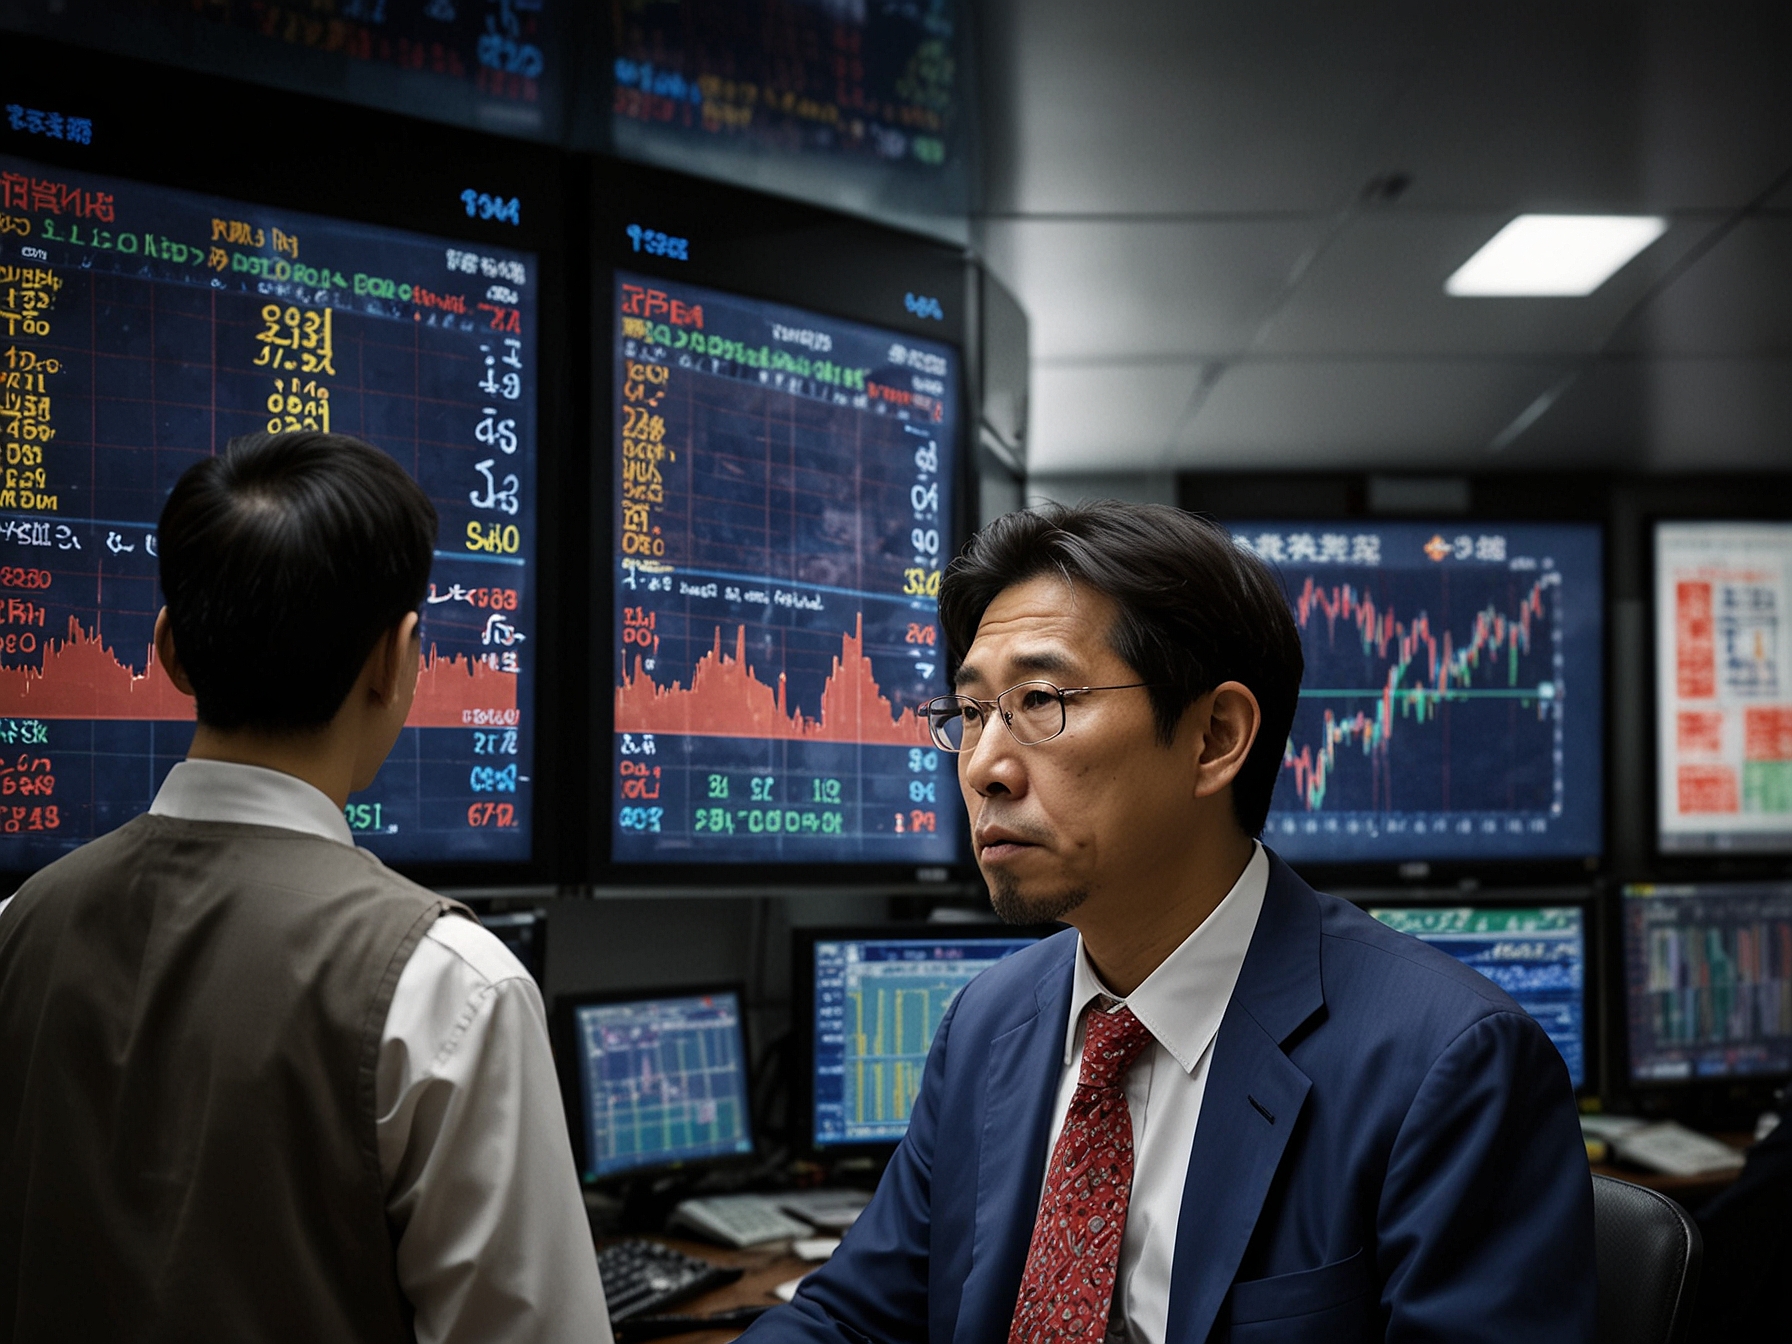 Traders at the Tokyo Stock Exchange displaying intense focus as they monitor yen's depreciation, with large electronic screens showing the current exchange rate.